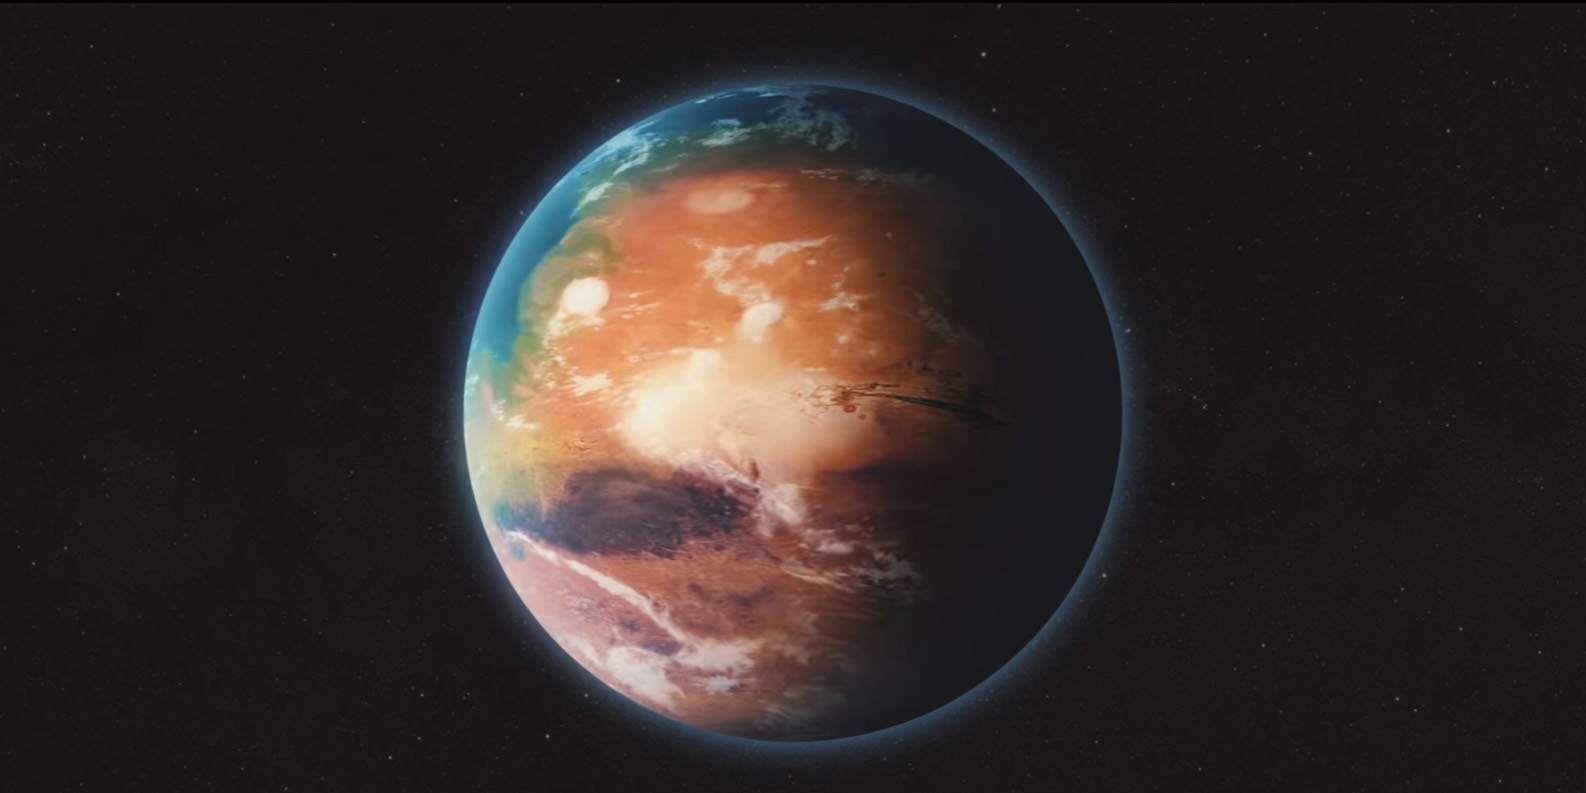 Elon Musk envisions humans living in glass domes on Mars1586 x 793